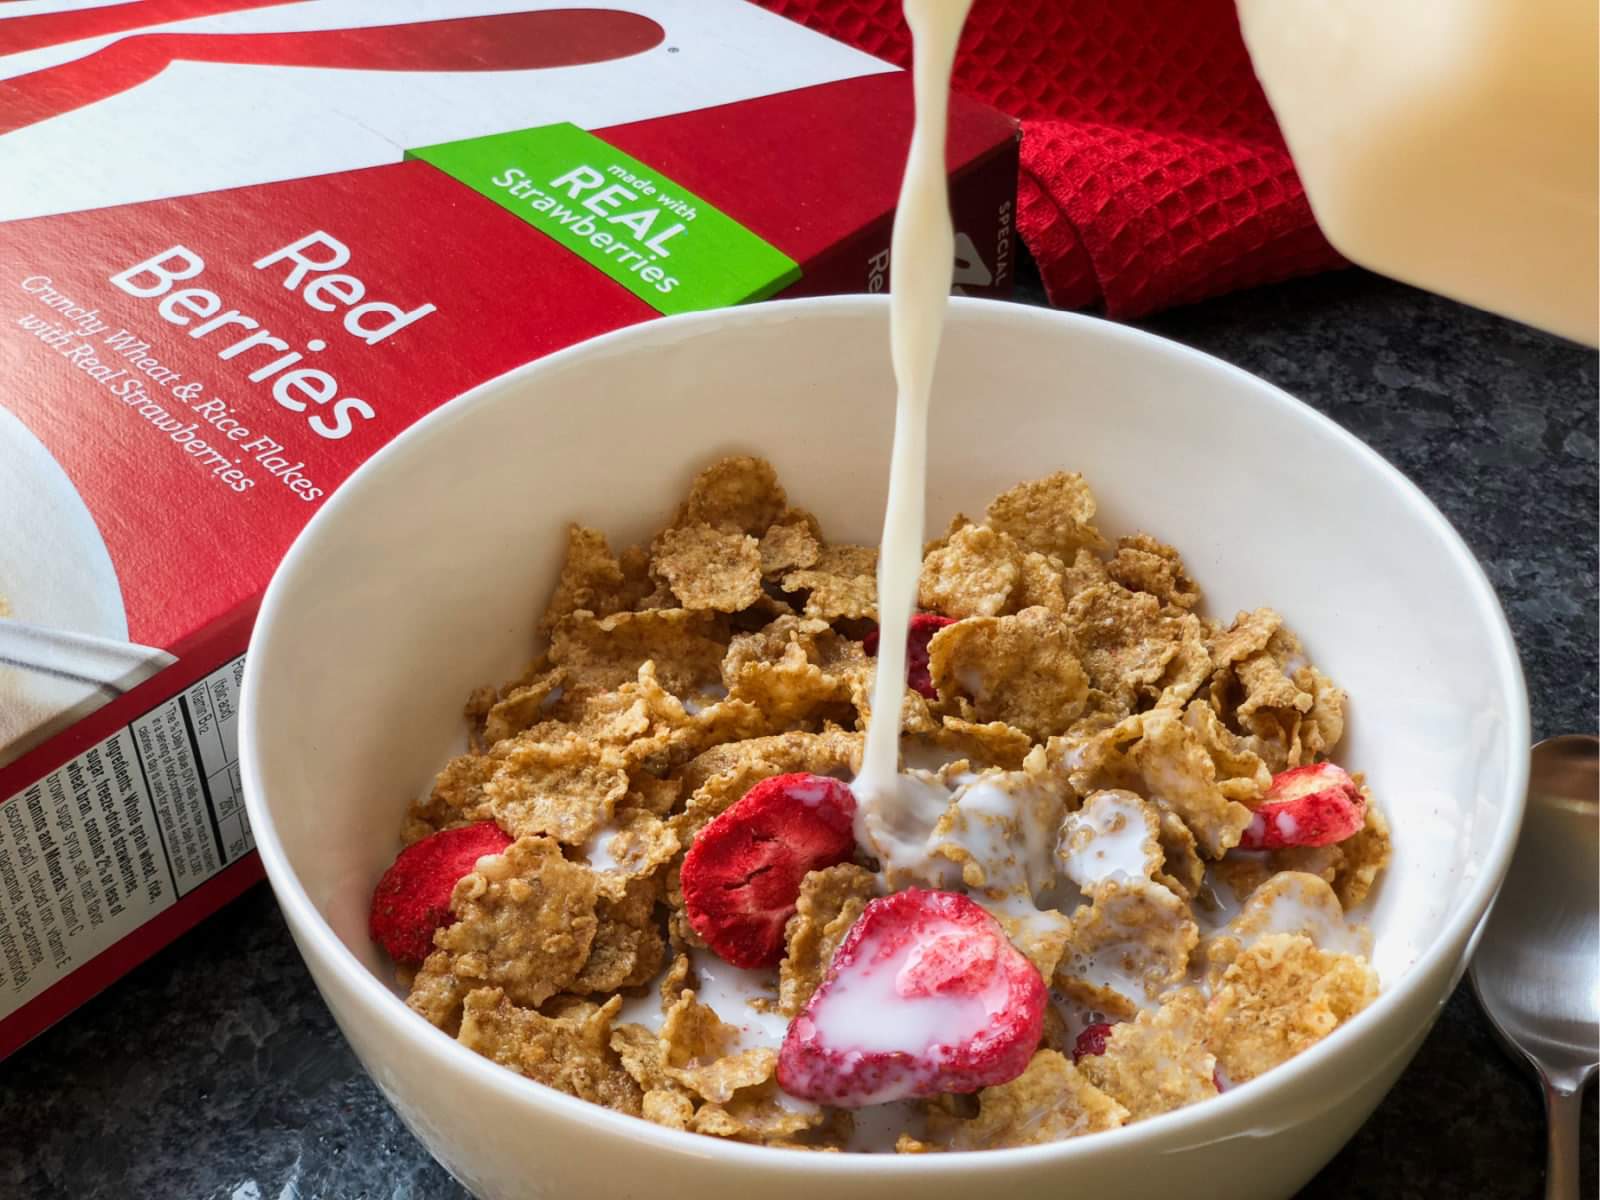 10 Special K Cereal Nutrition Facts 